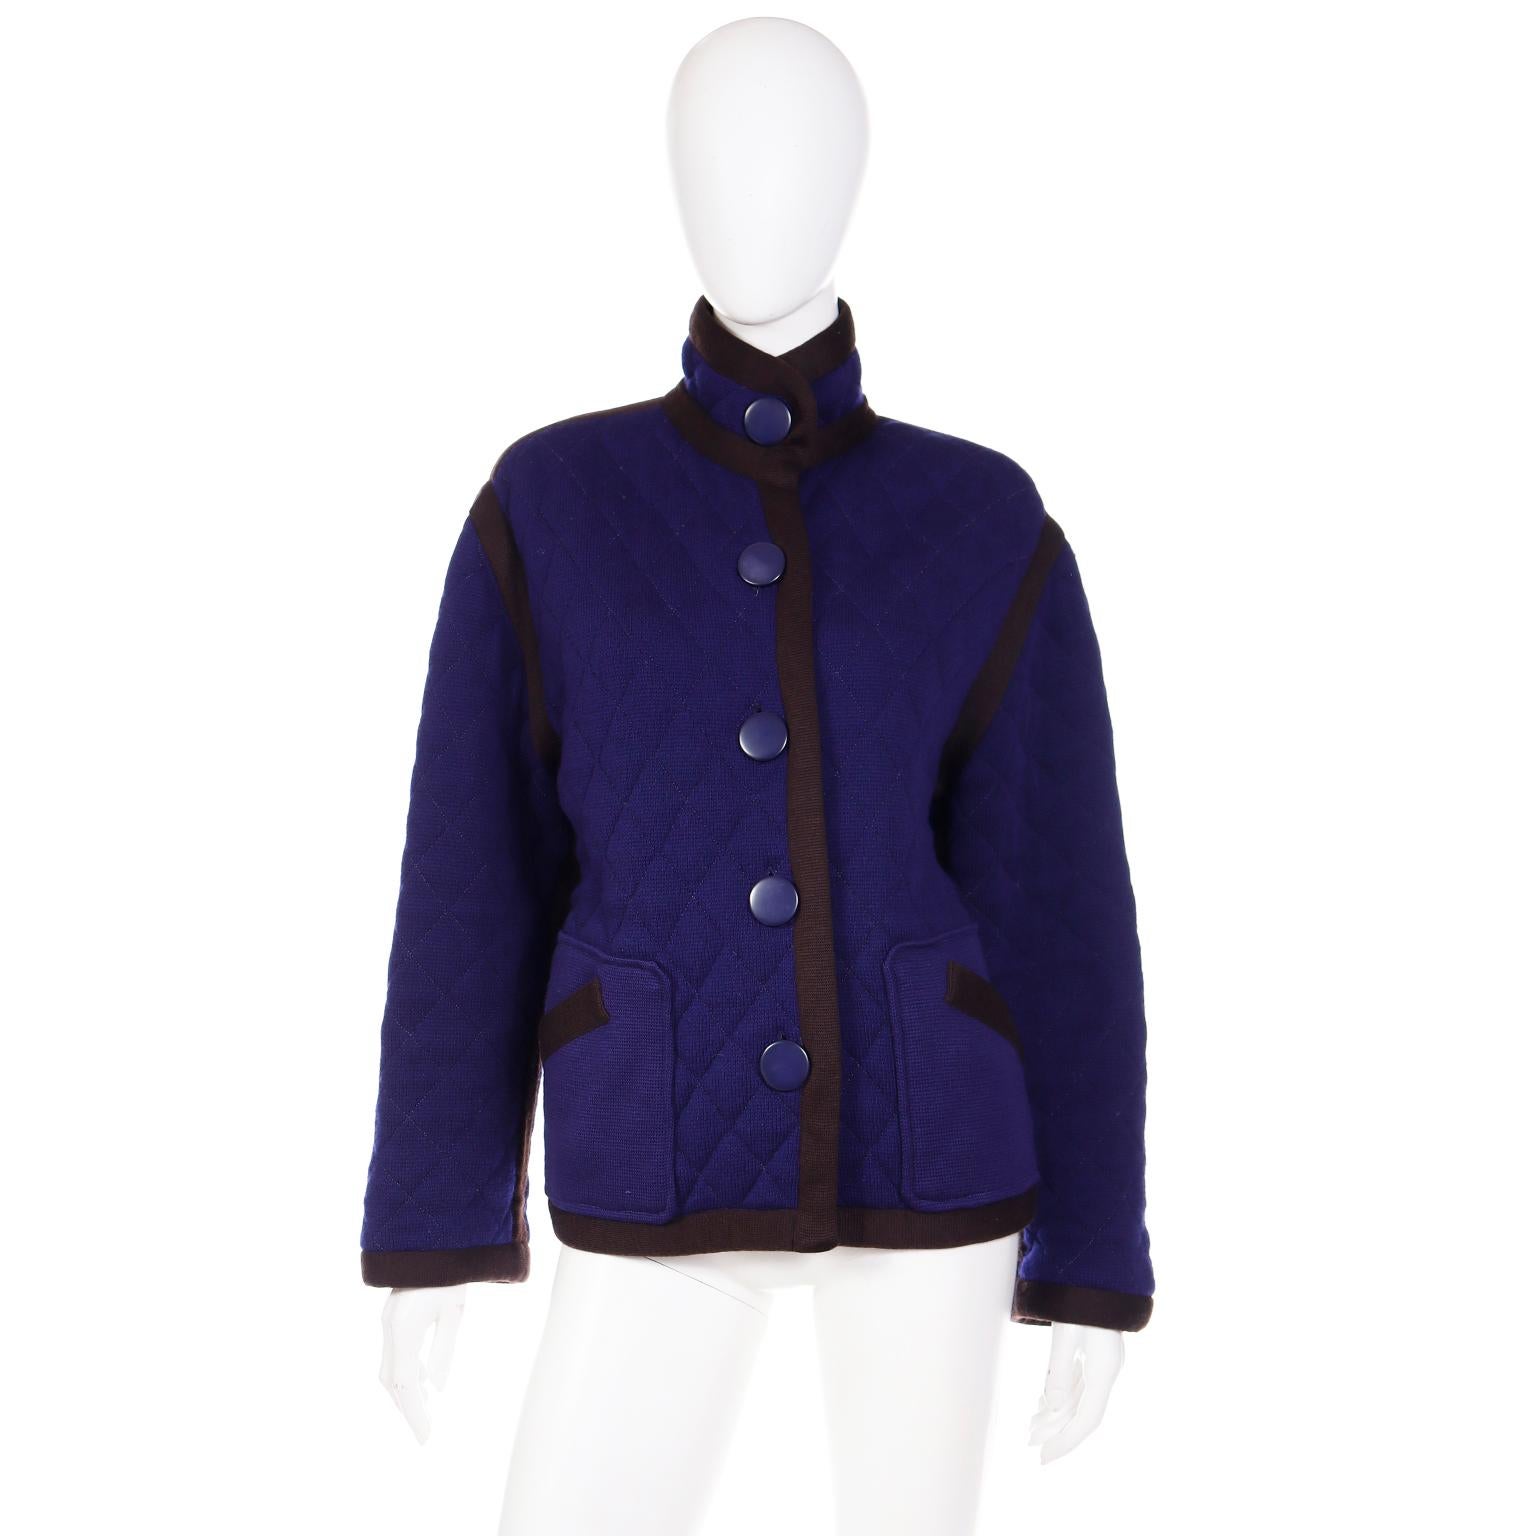 This fabulous vintage Yves Saint Laurent Rive Gauche royal blue quilted jacket is fully reversible to a dark plum purple. Both sides of this fab YSL jacket have slash pockets and large round blue button closures.  Labeled Saint Laurent Rive Gauche